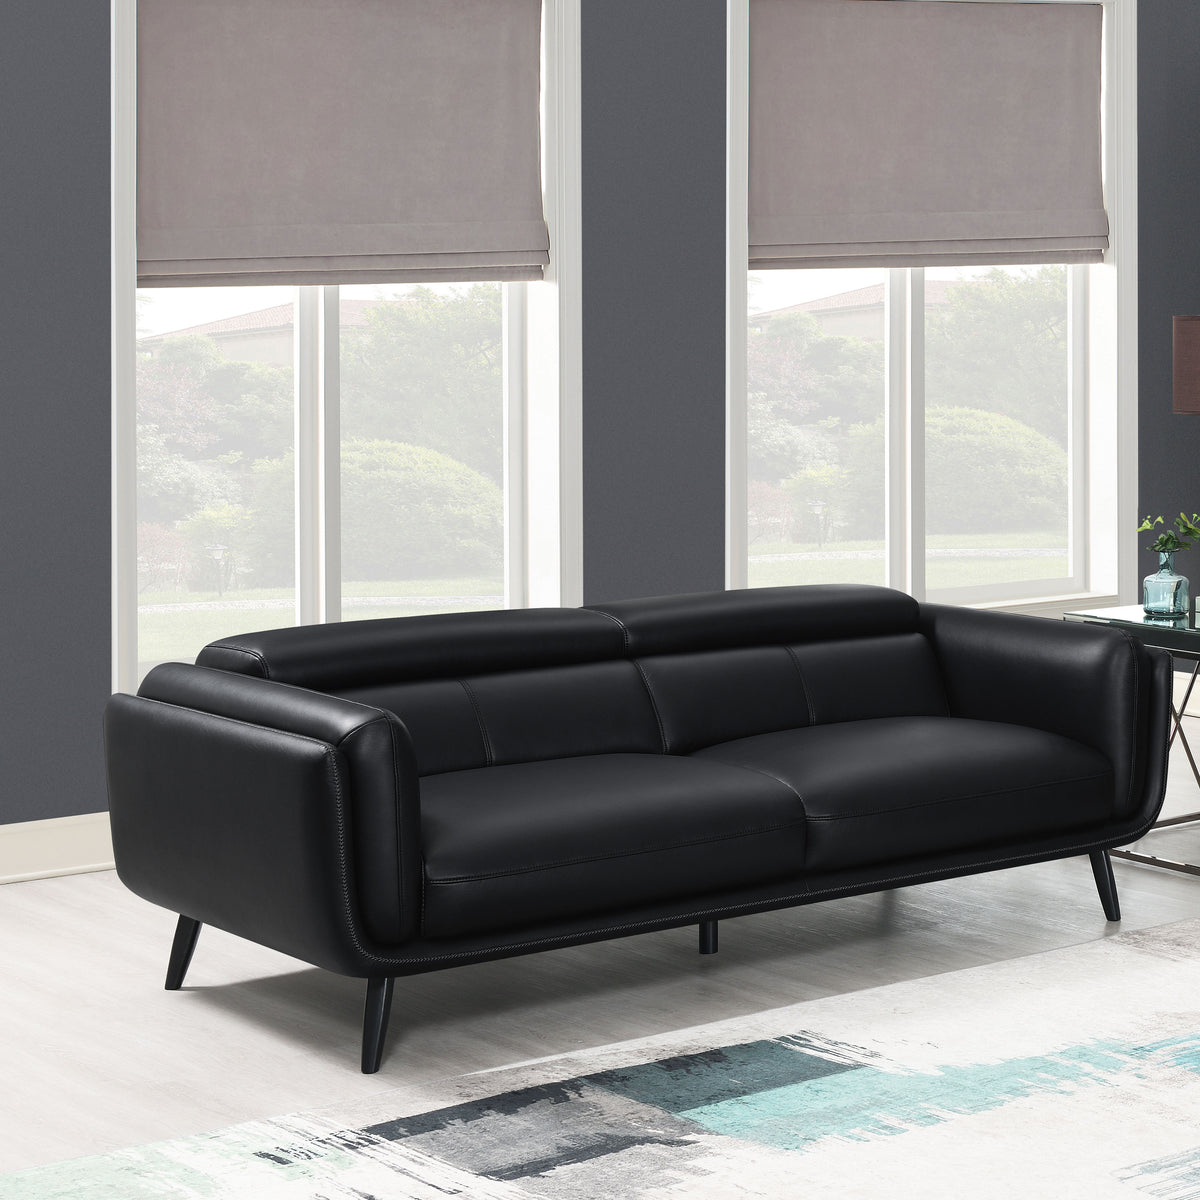 Shania Track Arms Sofa with Tapered Legs Black  Half Price Furniture